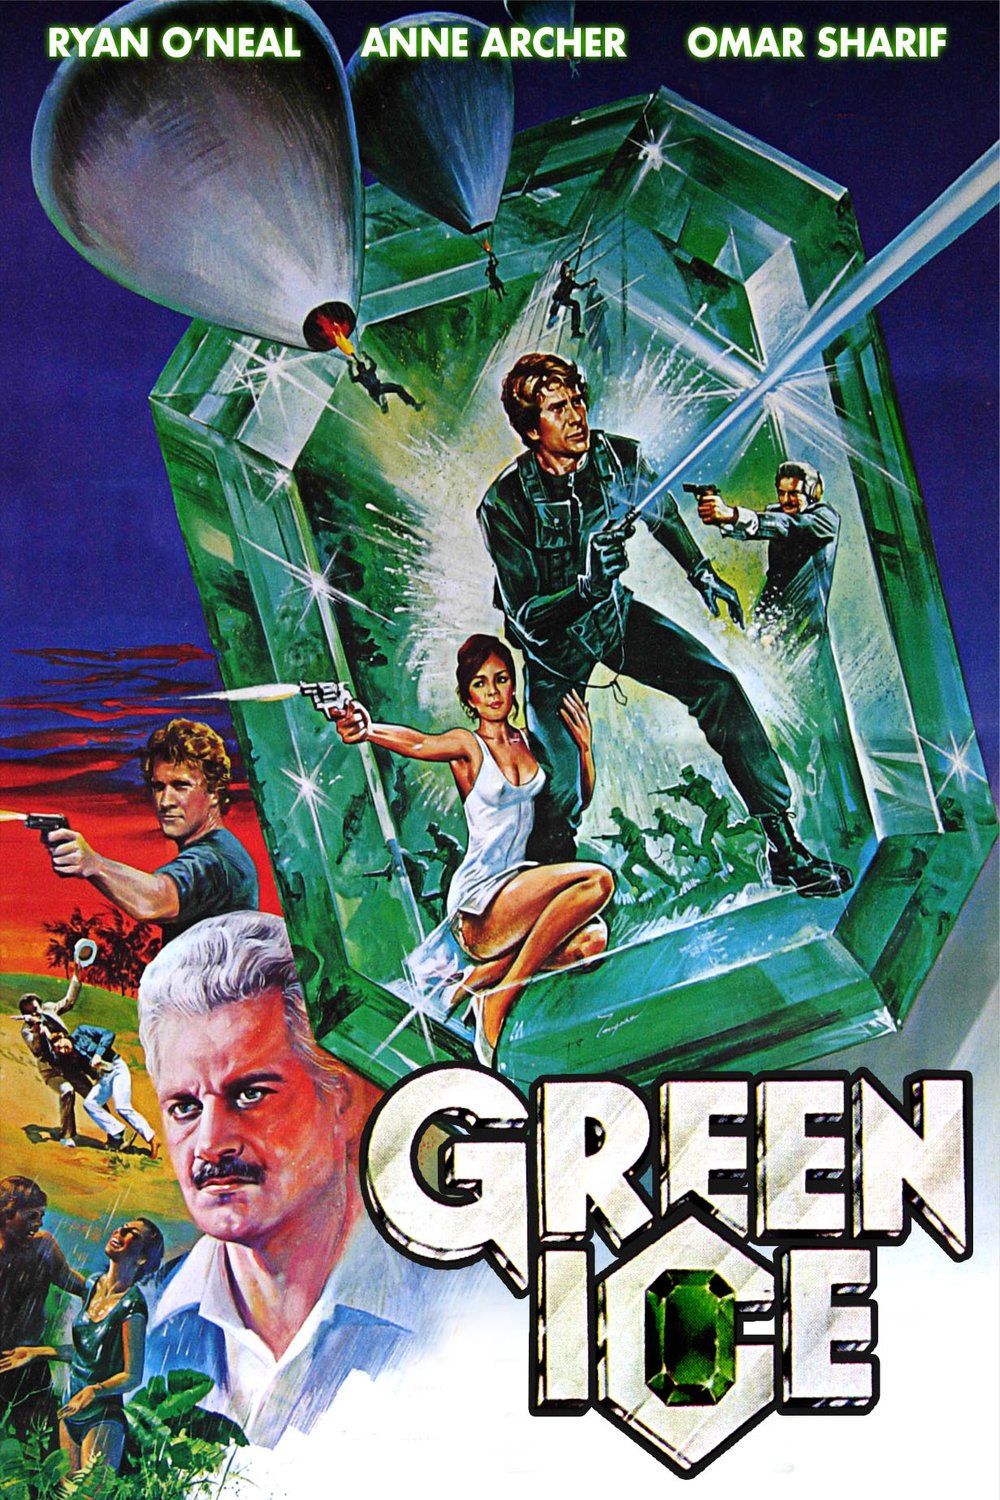 Poster of the movie Green Ice